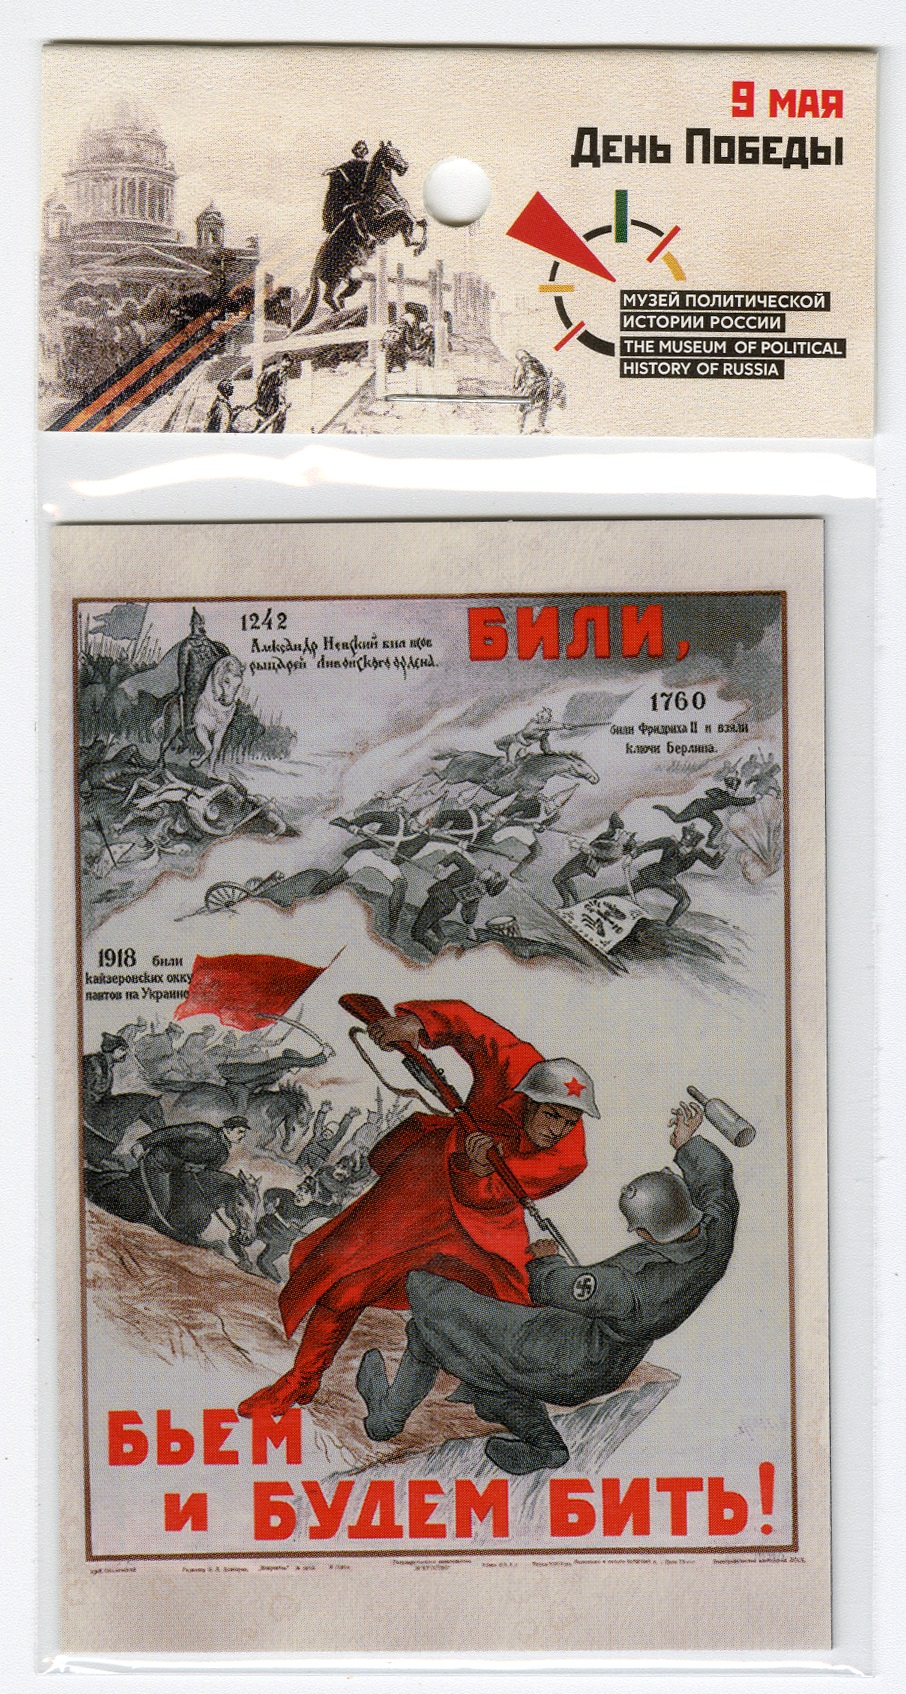 «We Beat the Enemy» (The Great Patriotic War)